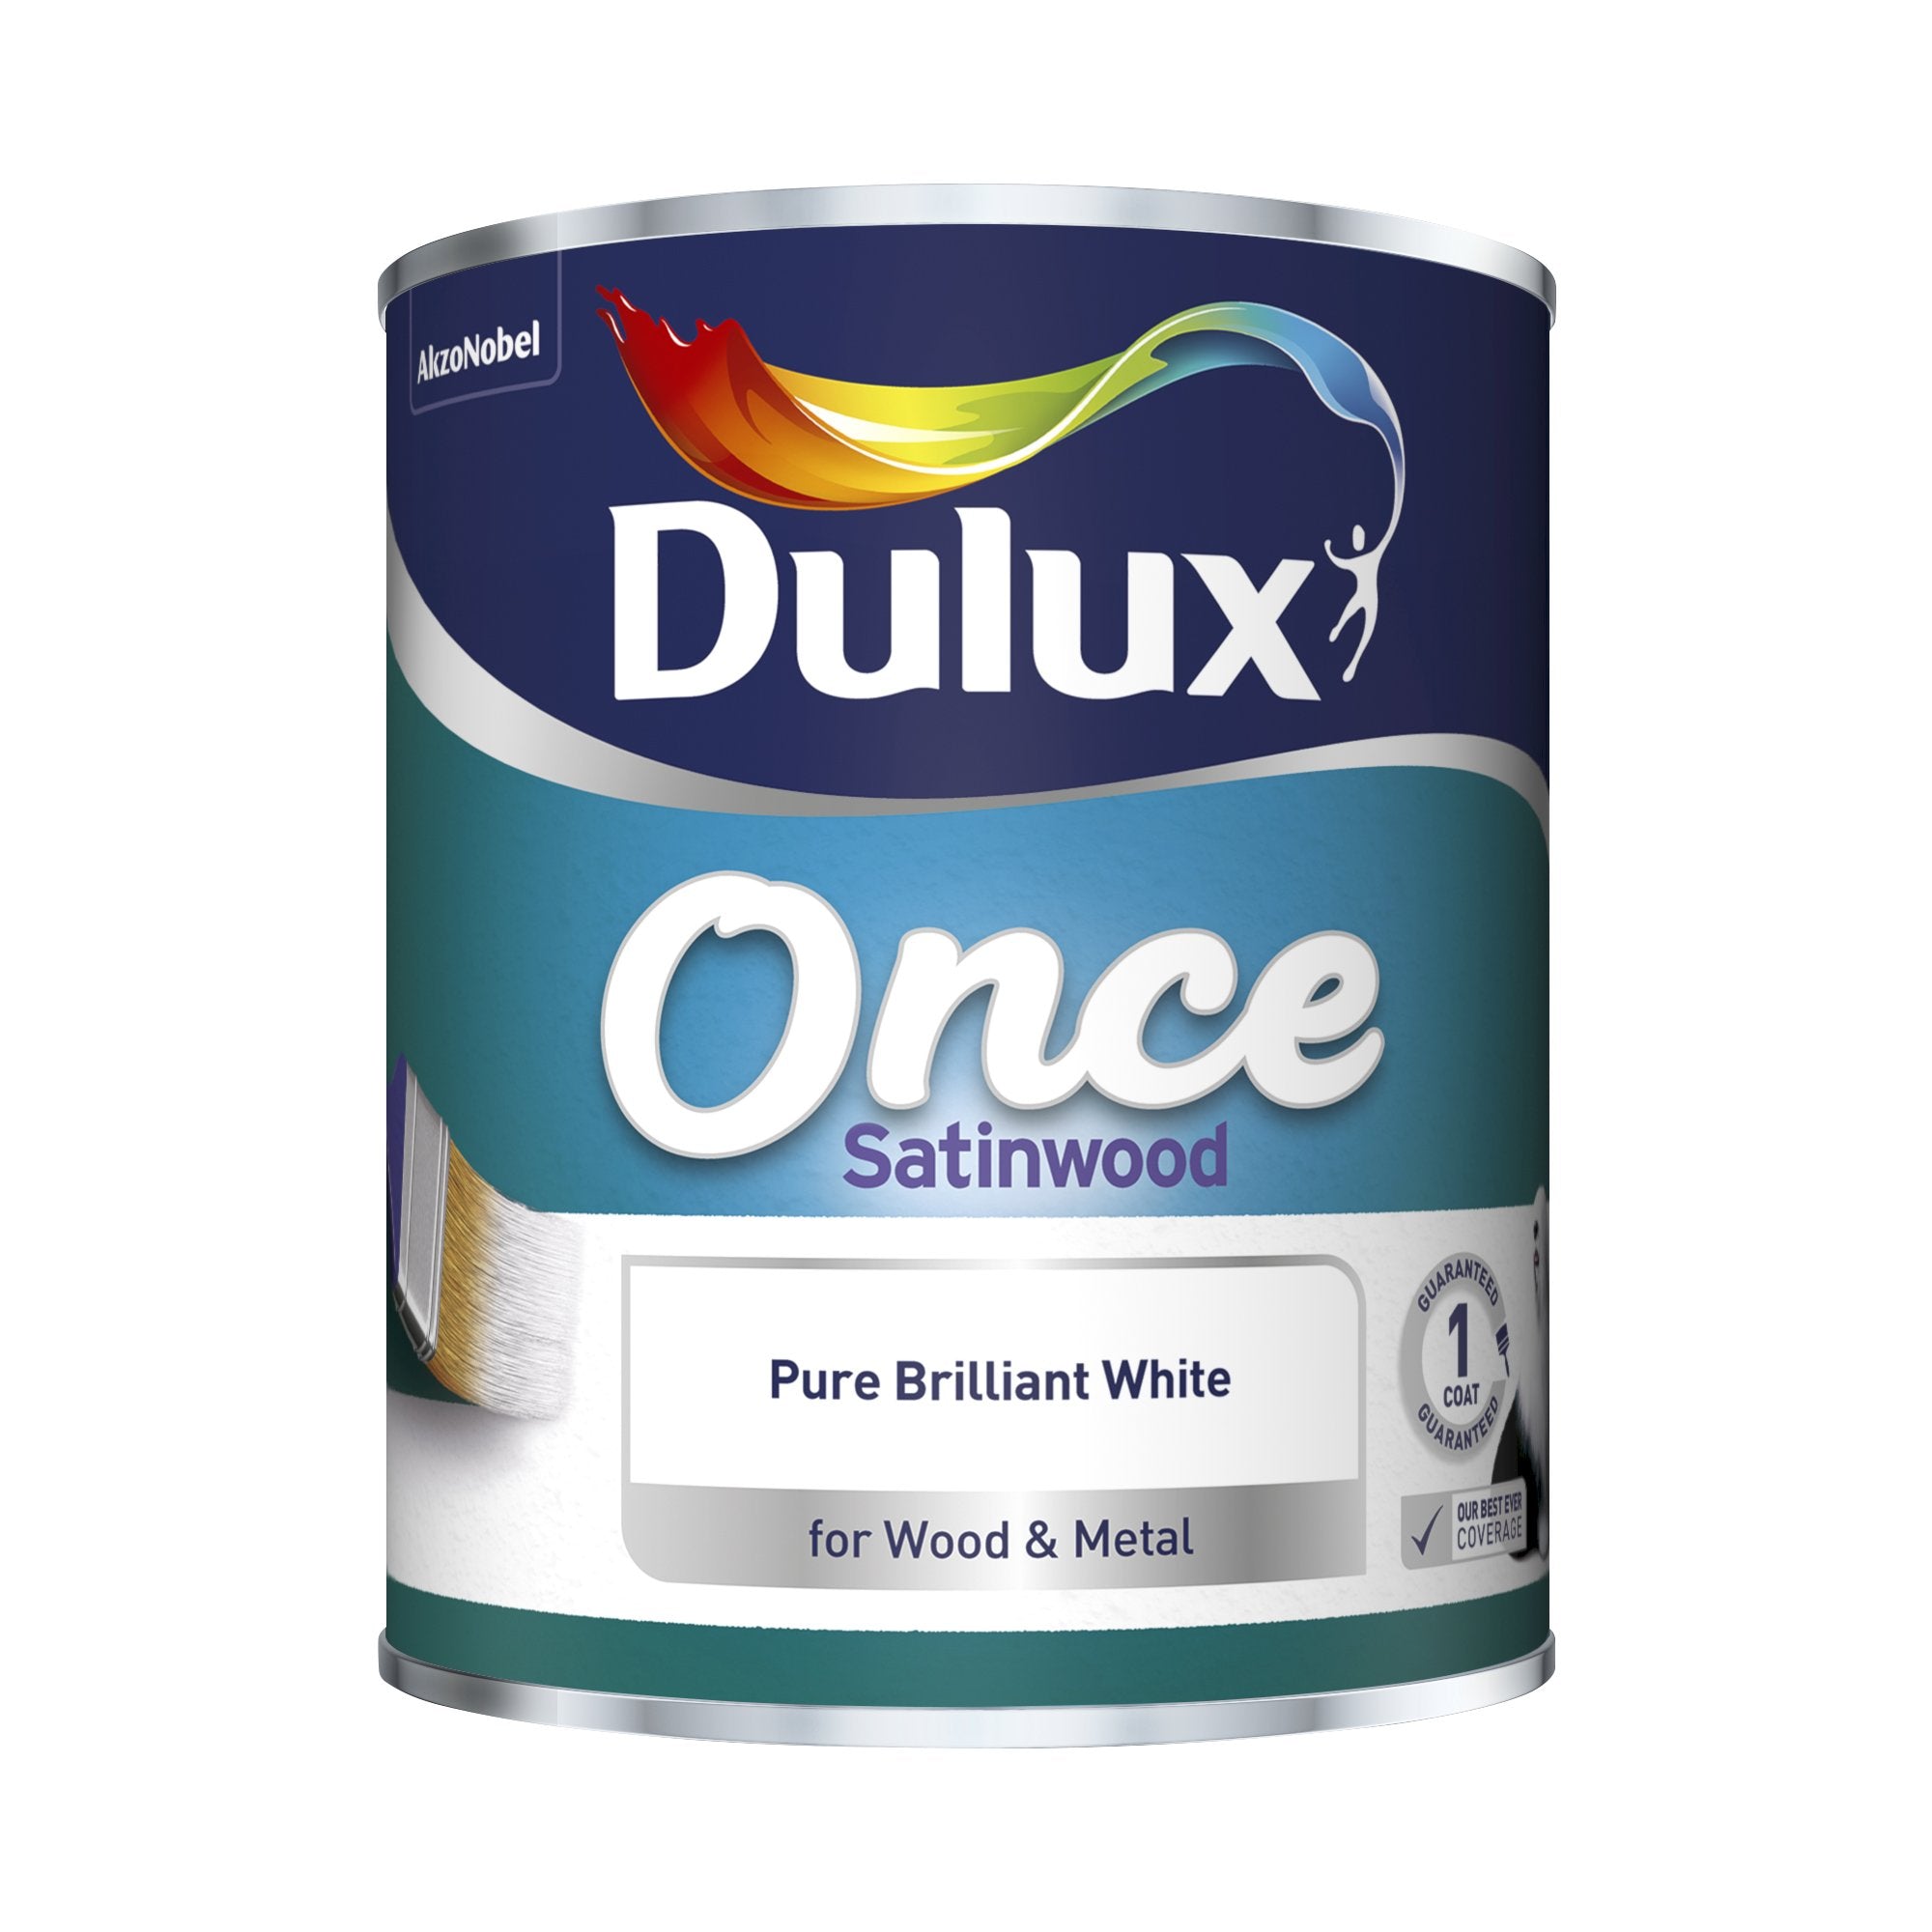 Dulux Once Satinwood Paint For Wood And Metal - Pure Brilliant White 750Ml Garden & Diy Home